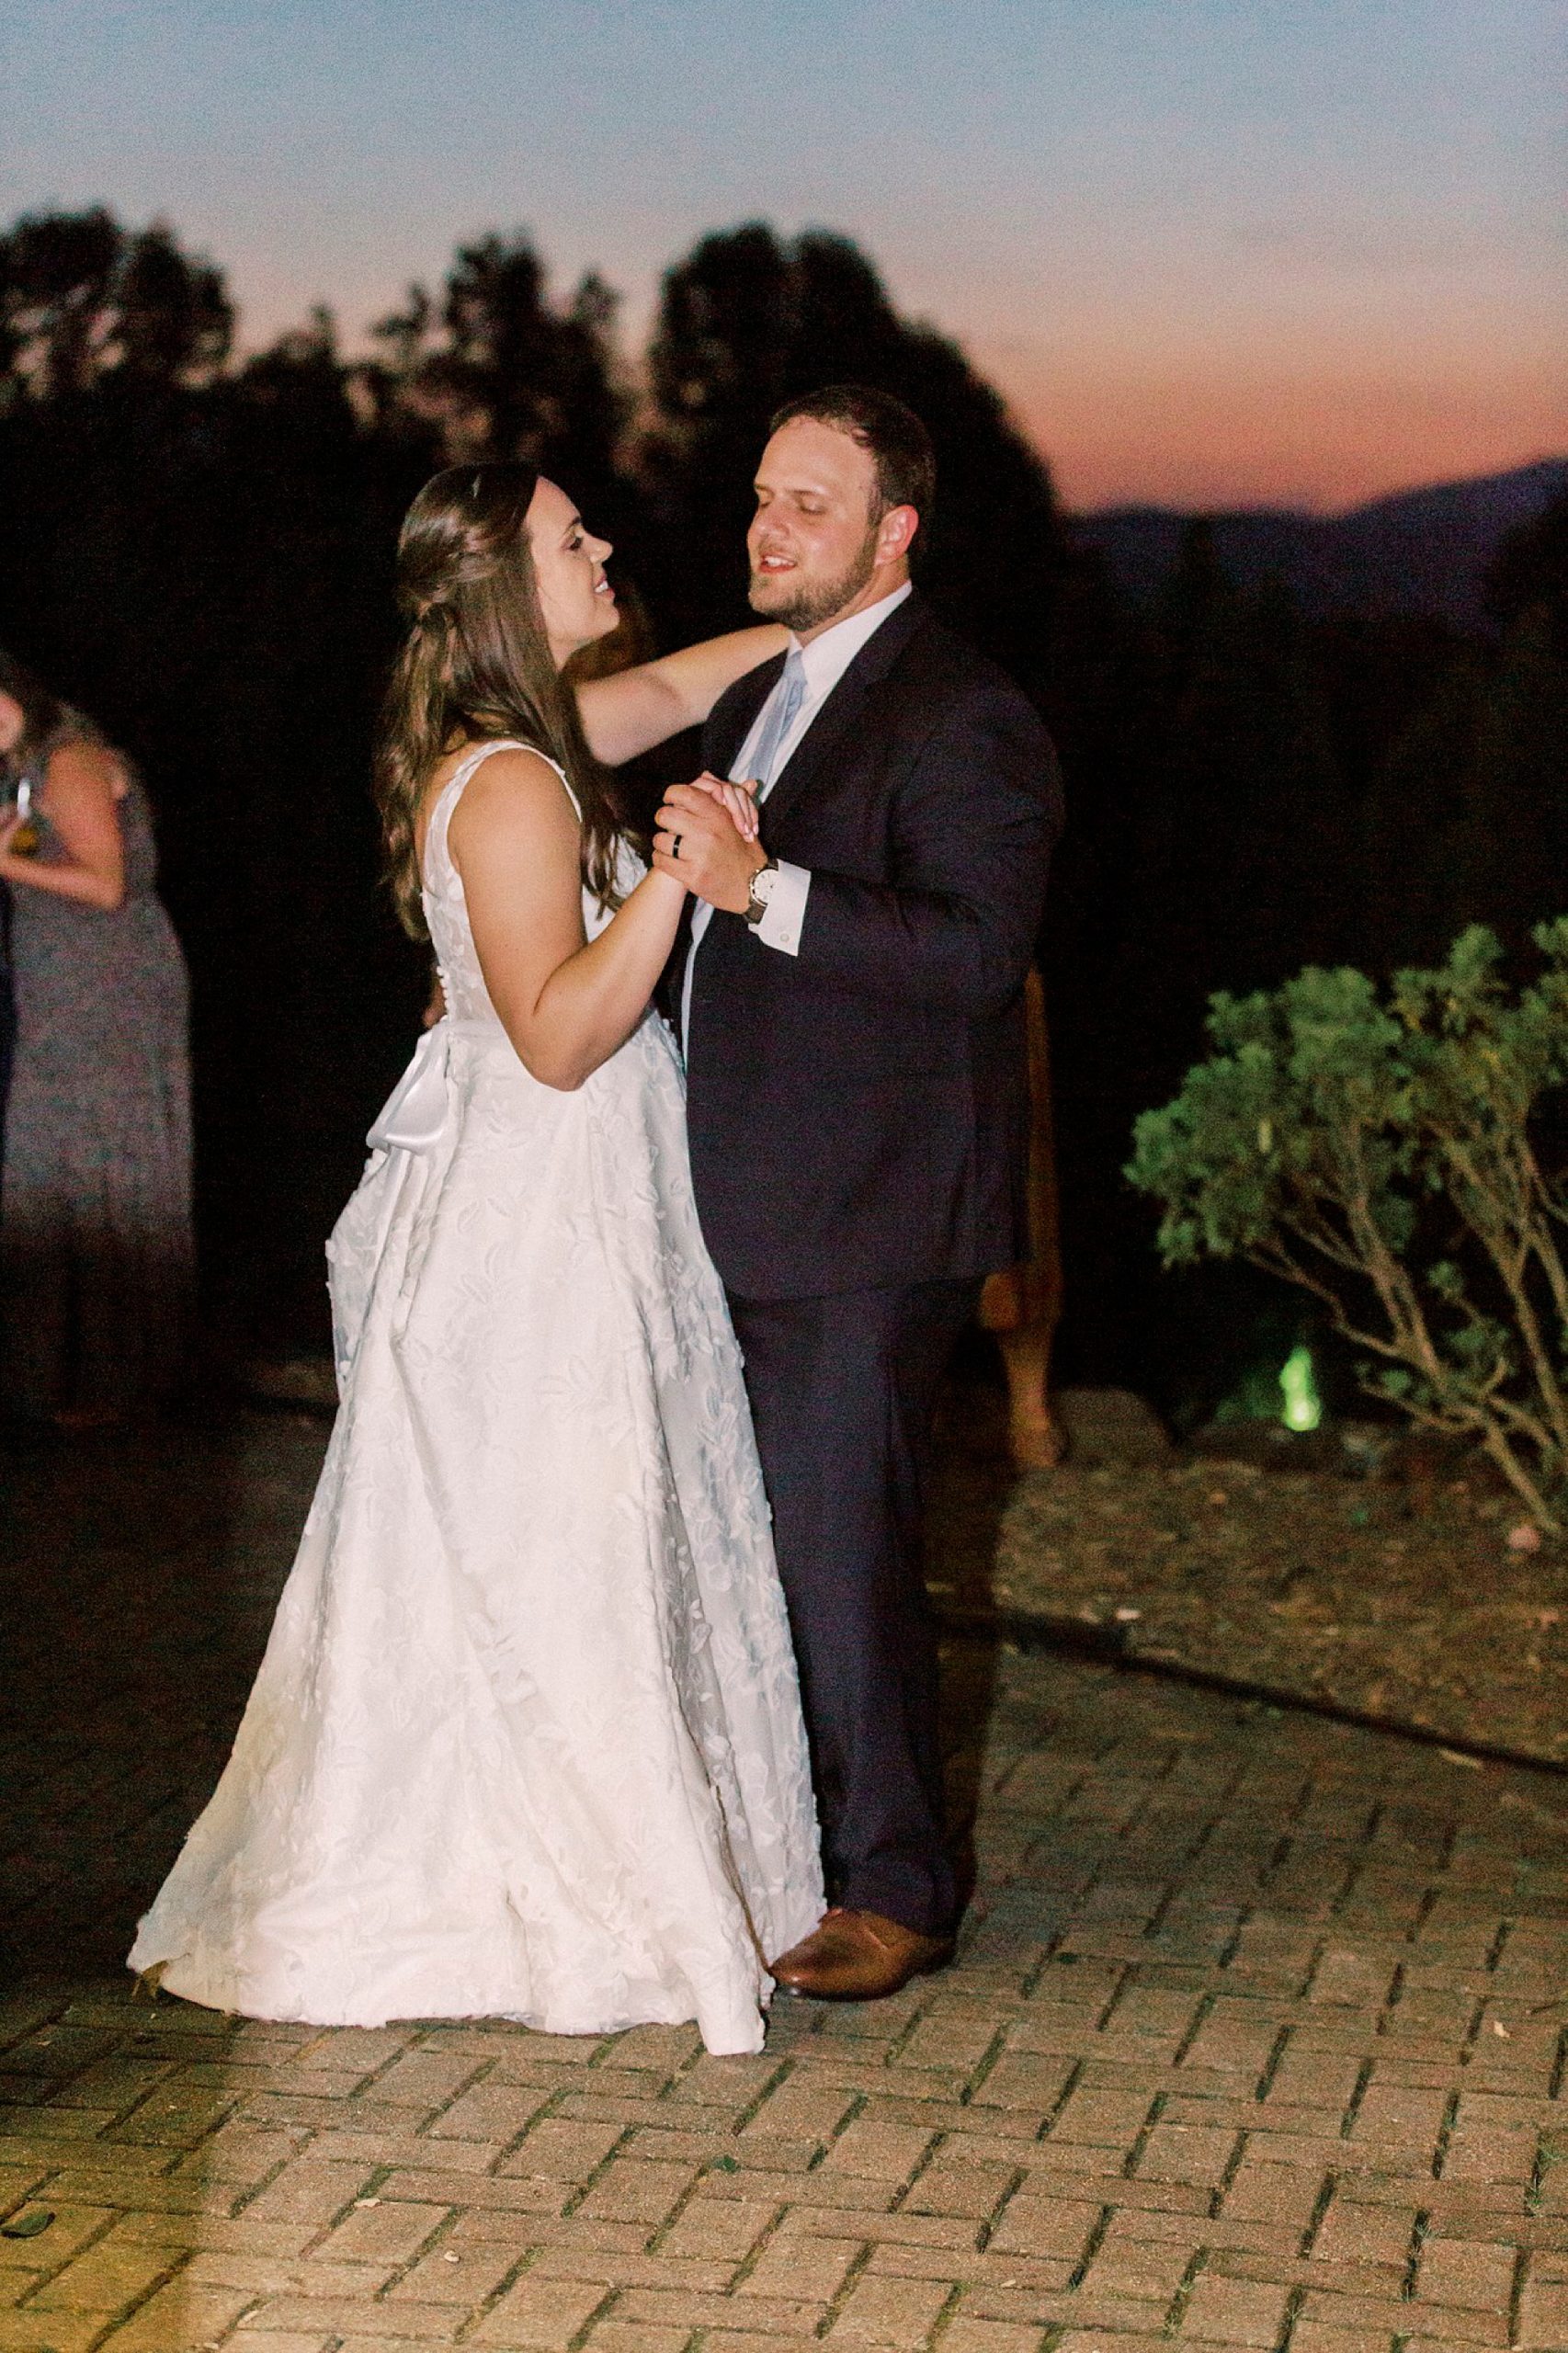 bride and groom dance at sunset during Blowing Rock NC wedding reception